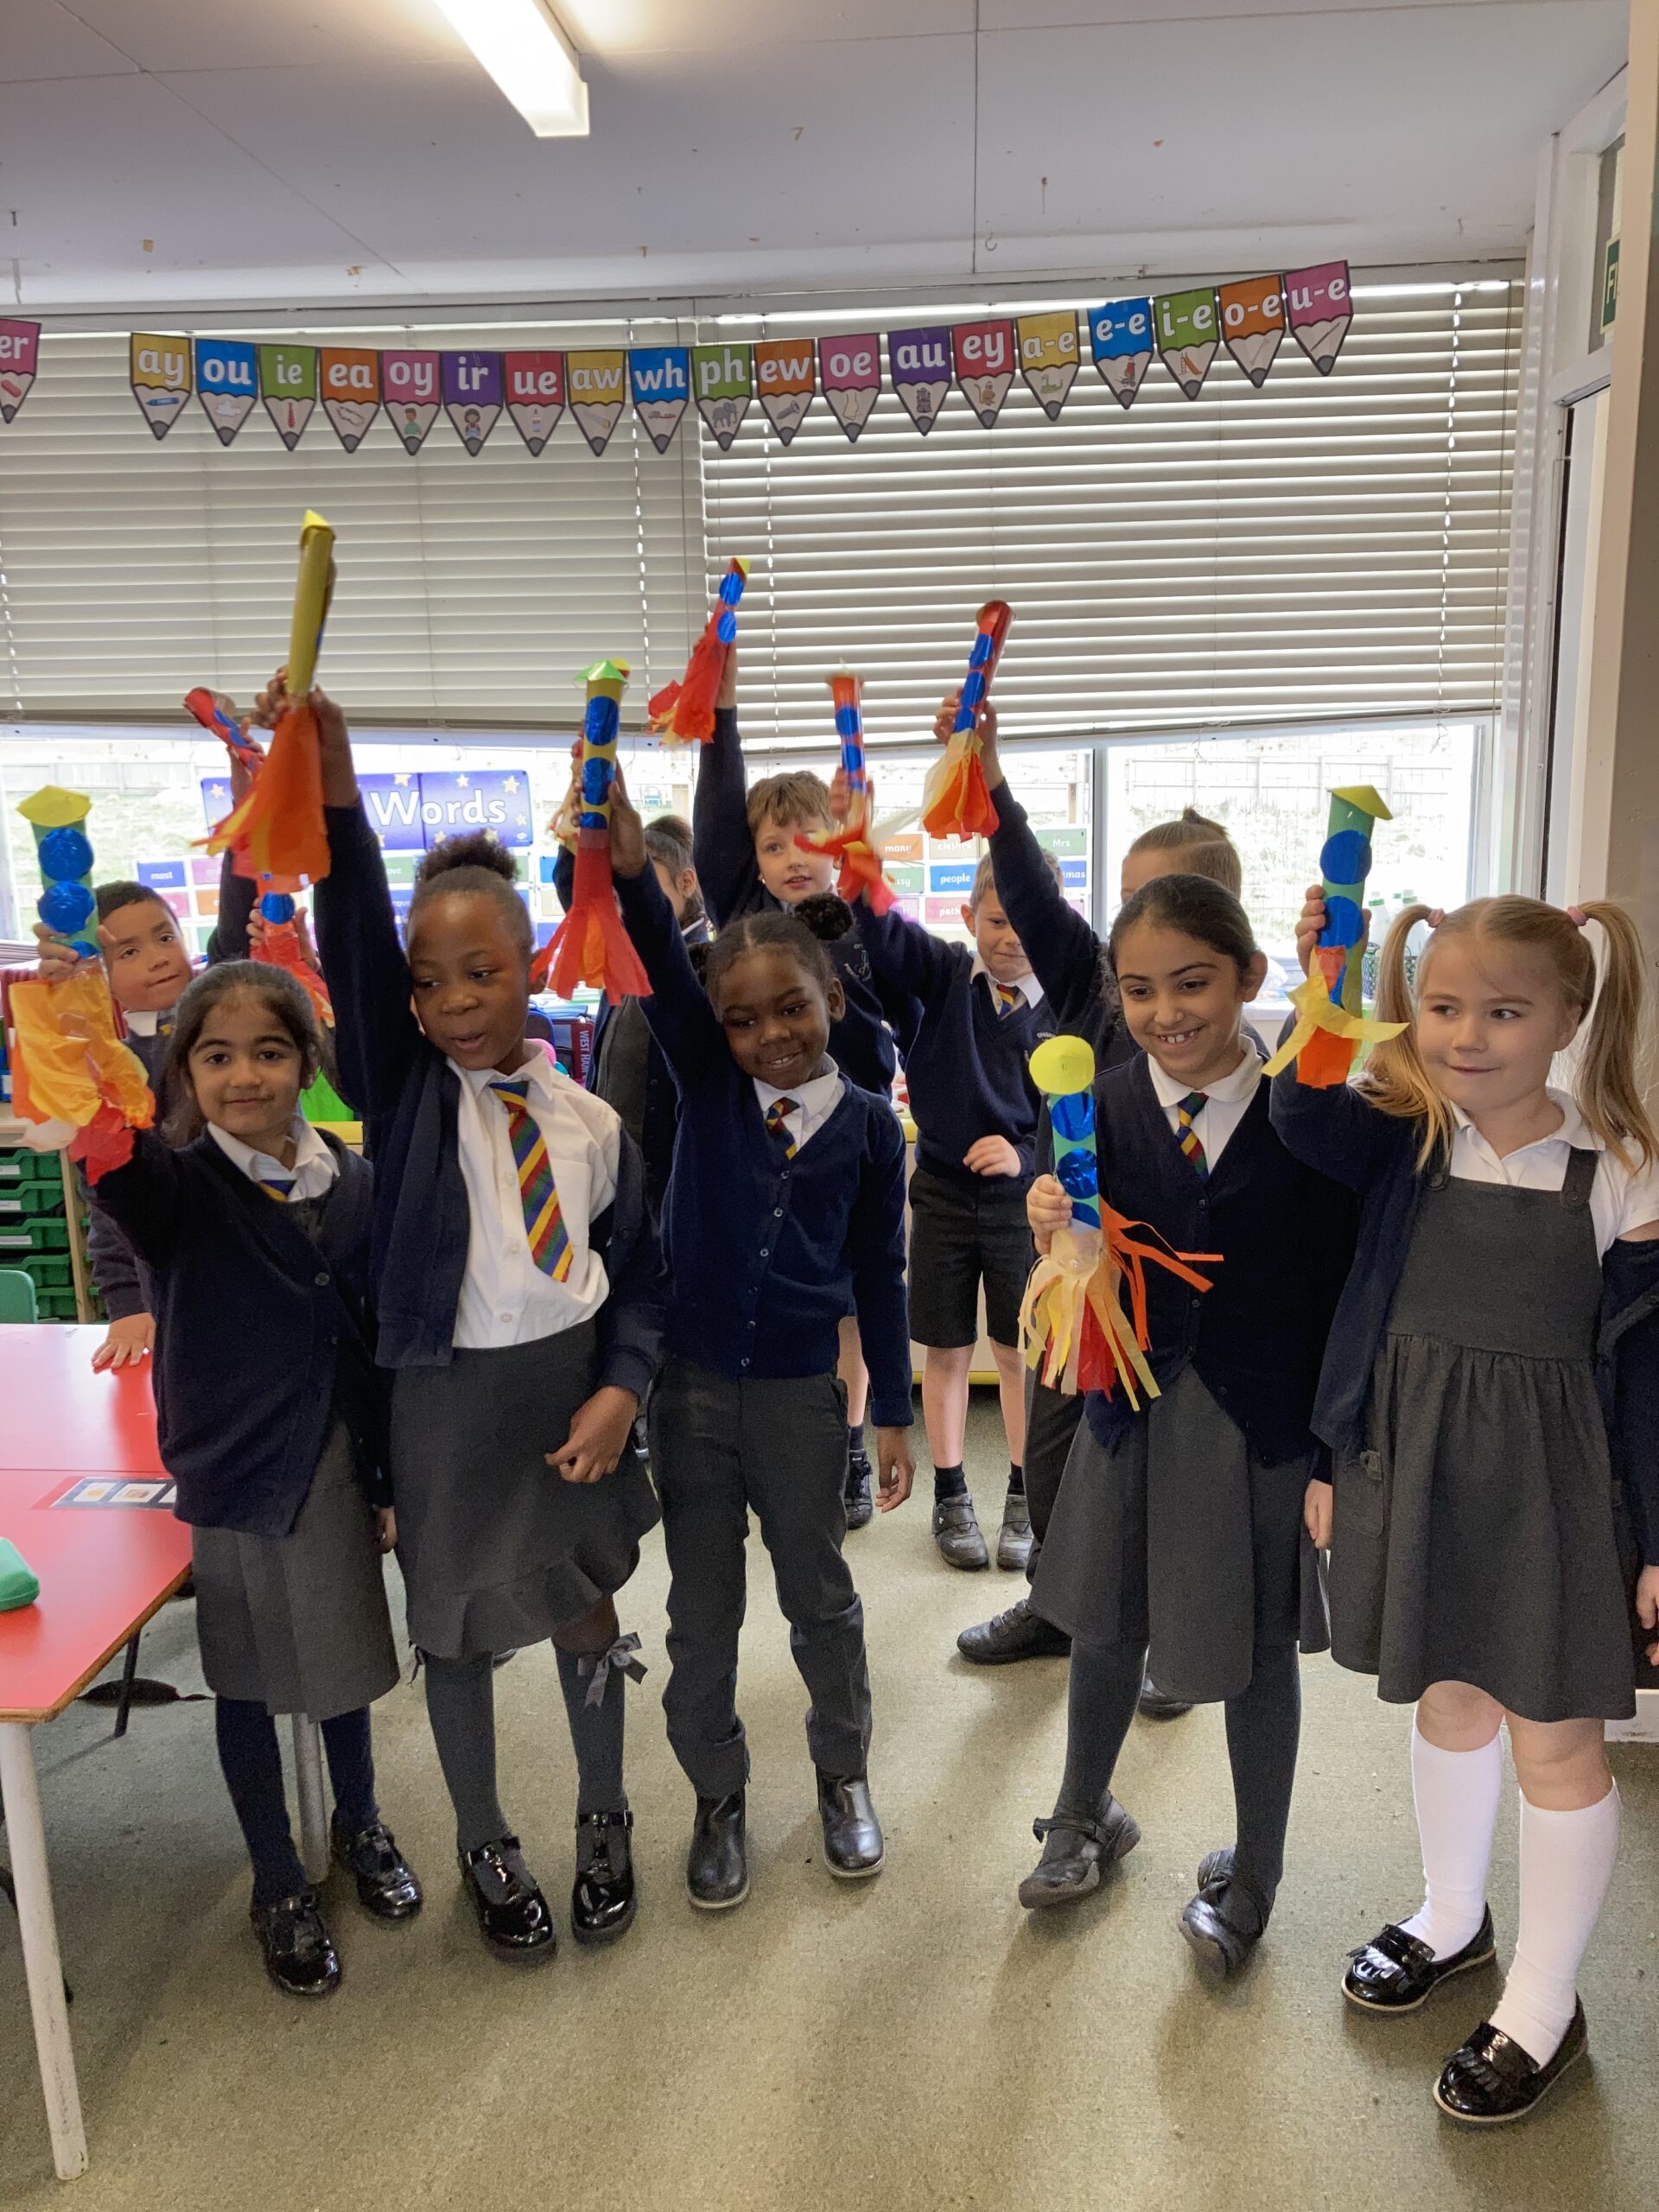 Ofsted judges Chigwell Primary Academy continues to offer a good education at school where “staff are proud to work here”